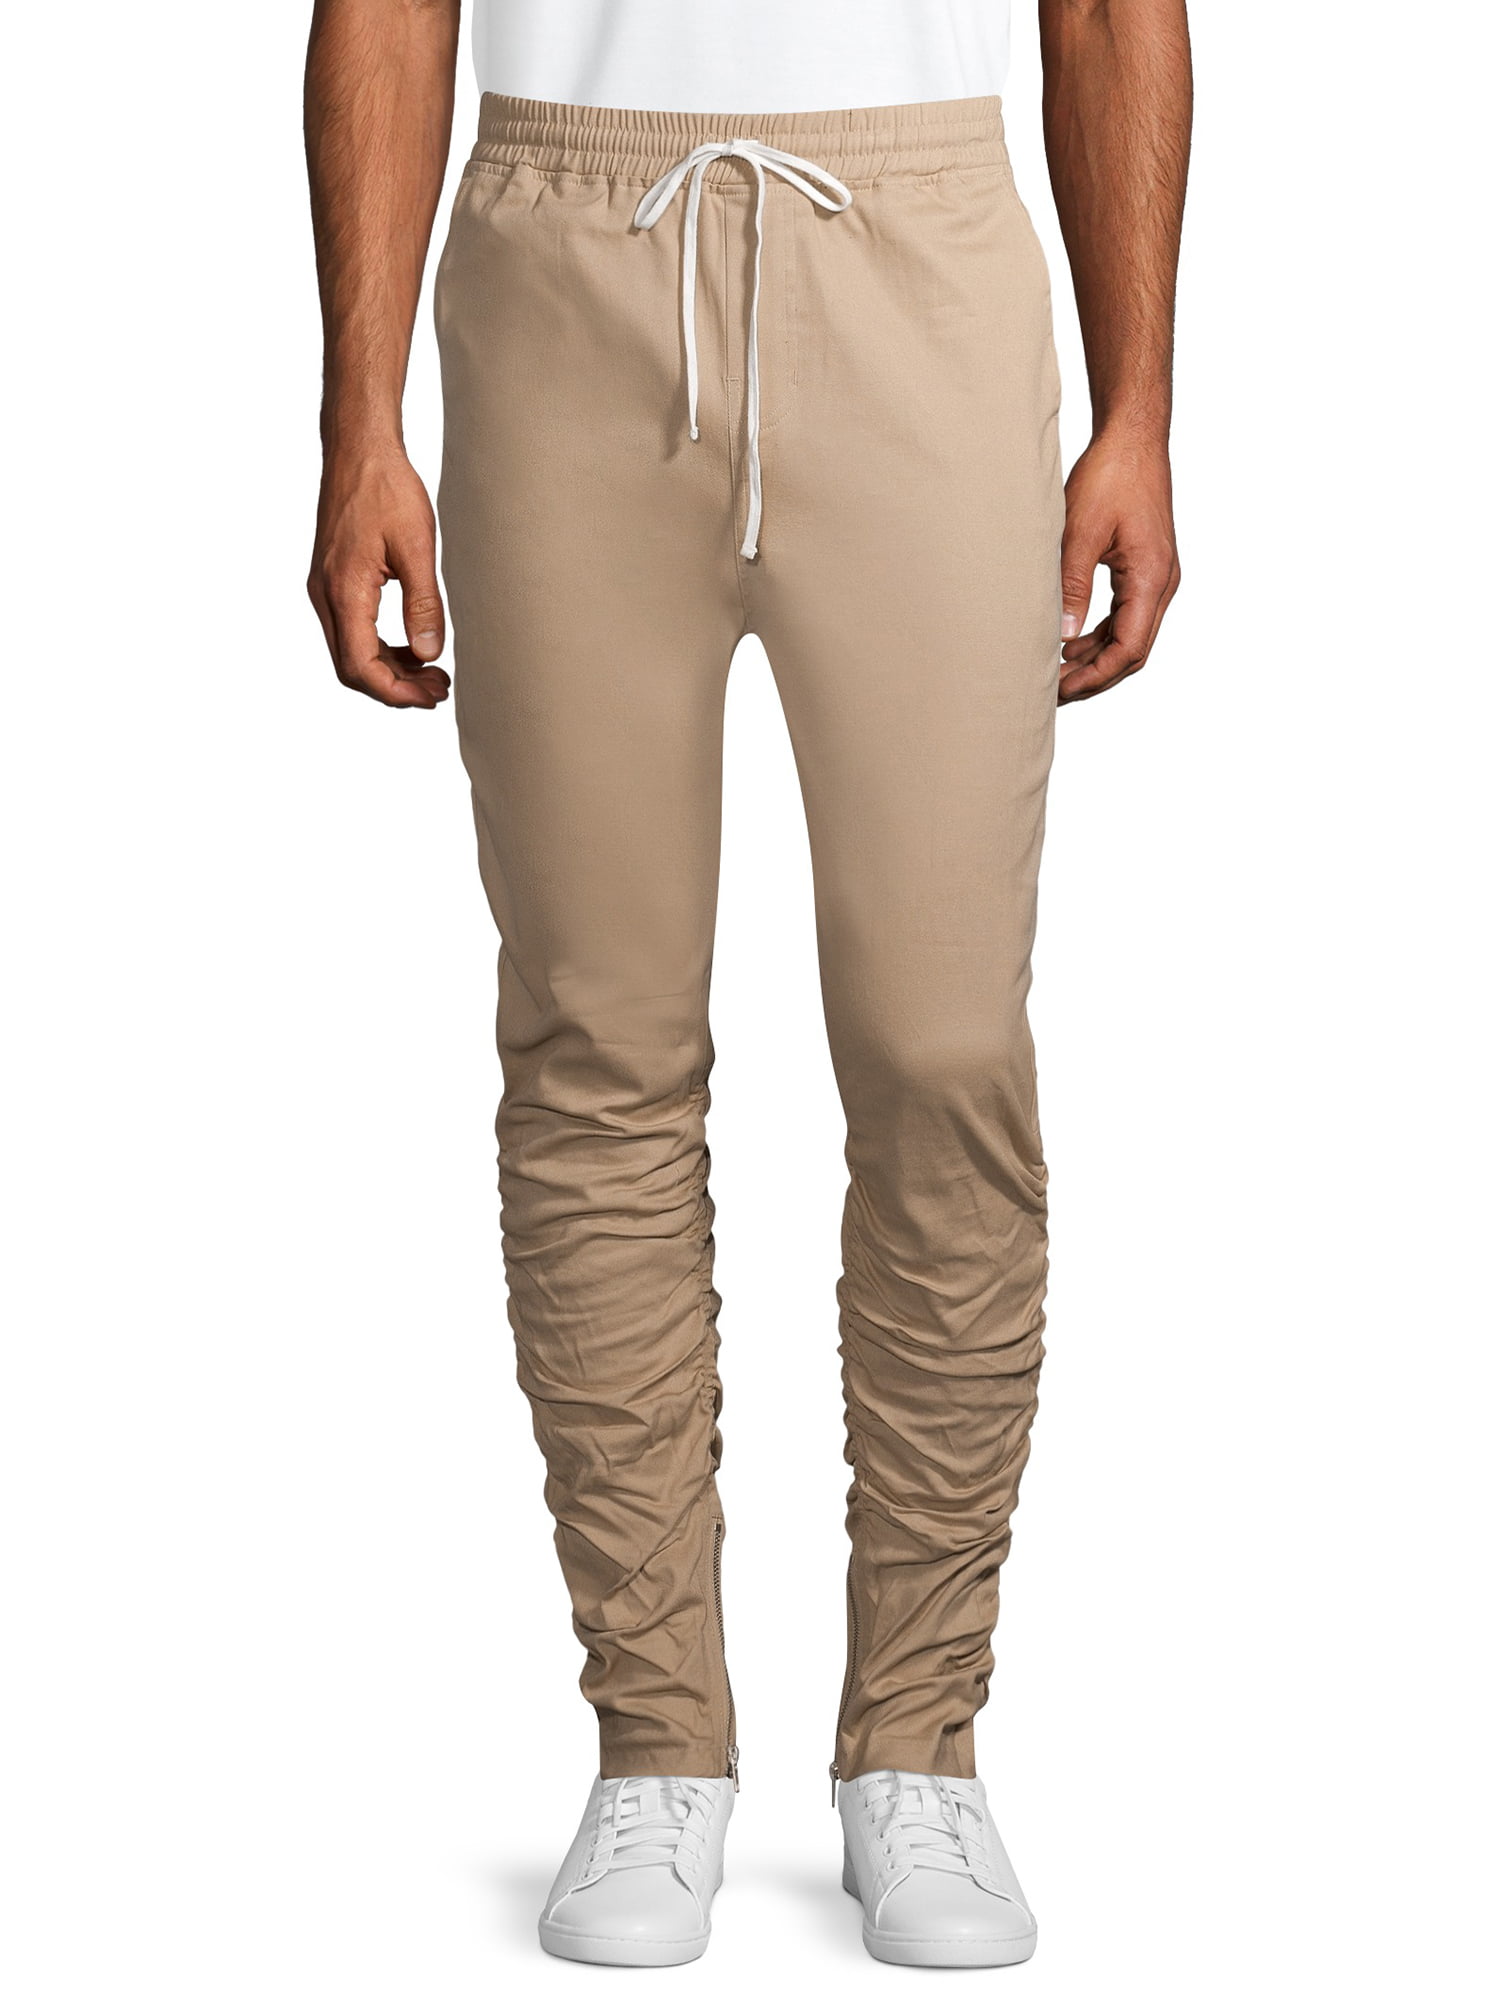 mens pants with zipper at ankle